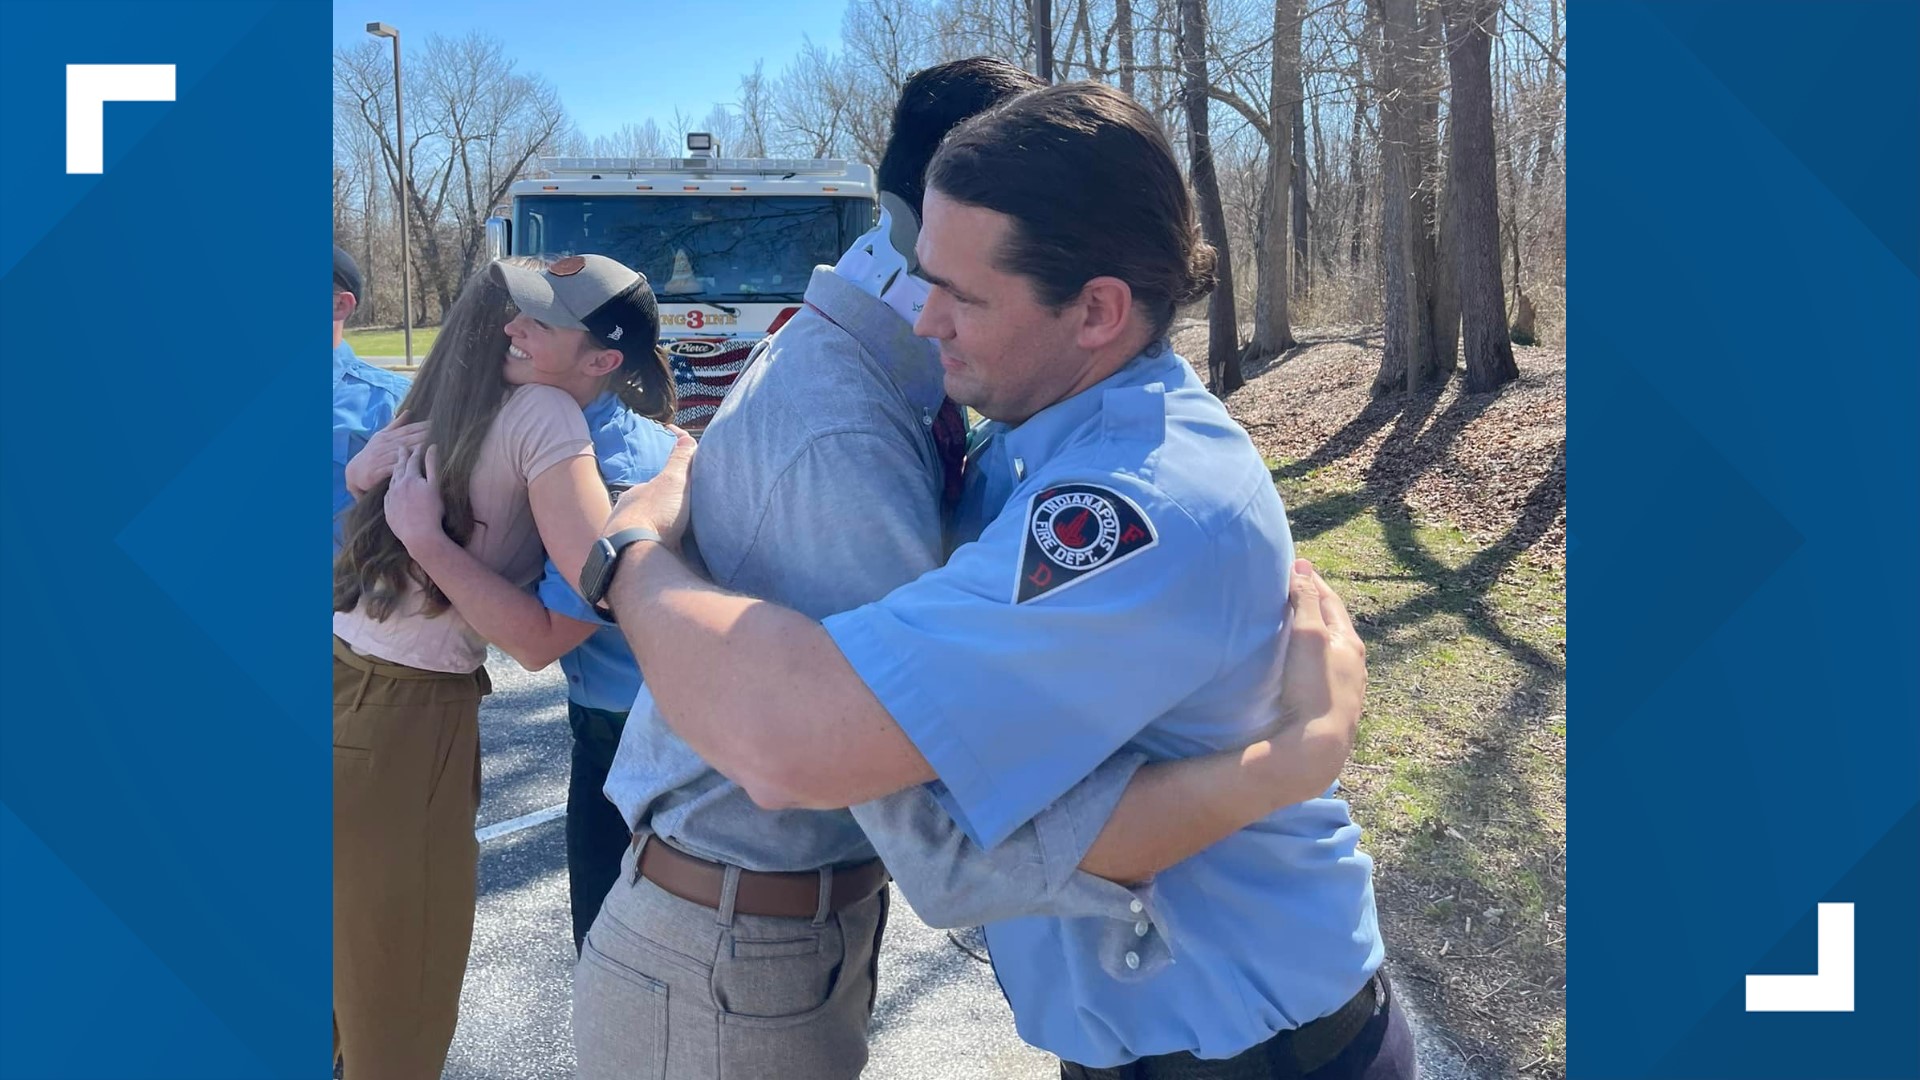 Sunday was the first time Officer Mangan had seen the firefighters since they took him to the hospital after he was shot in Fountain Square on Feb. 27.